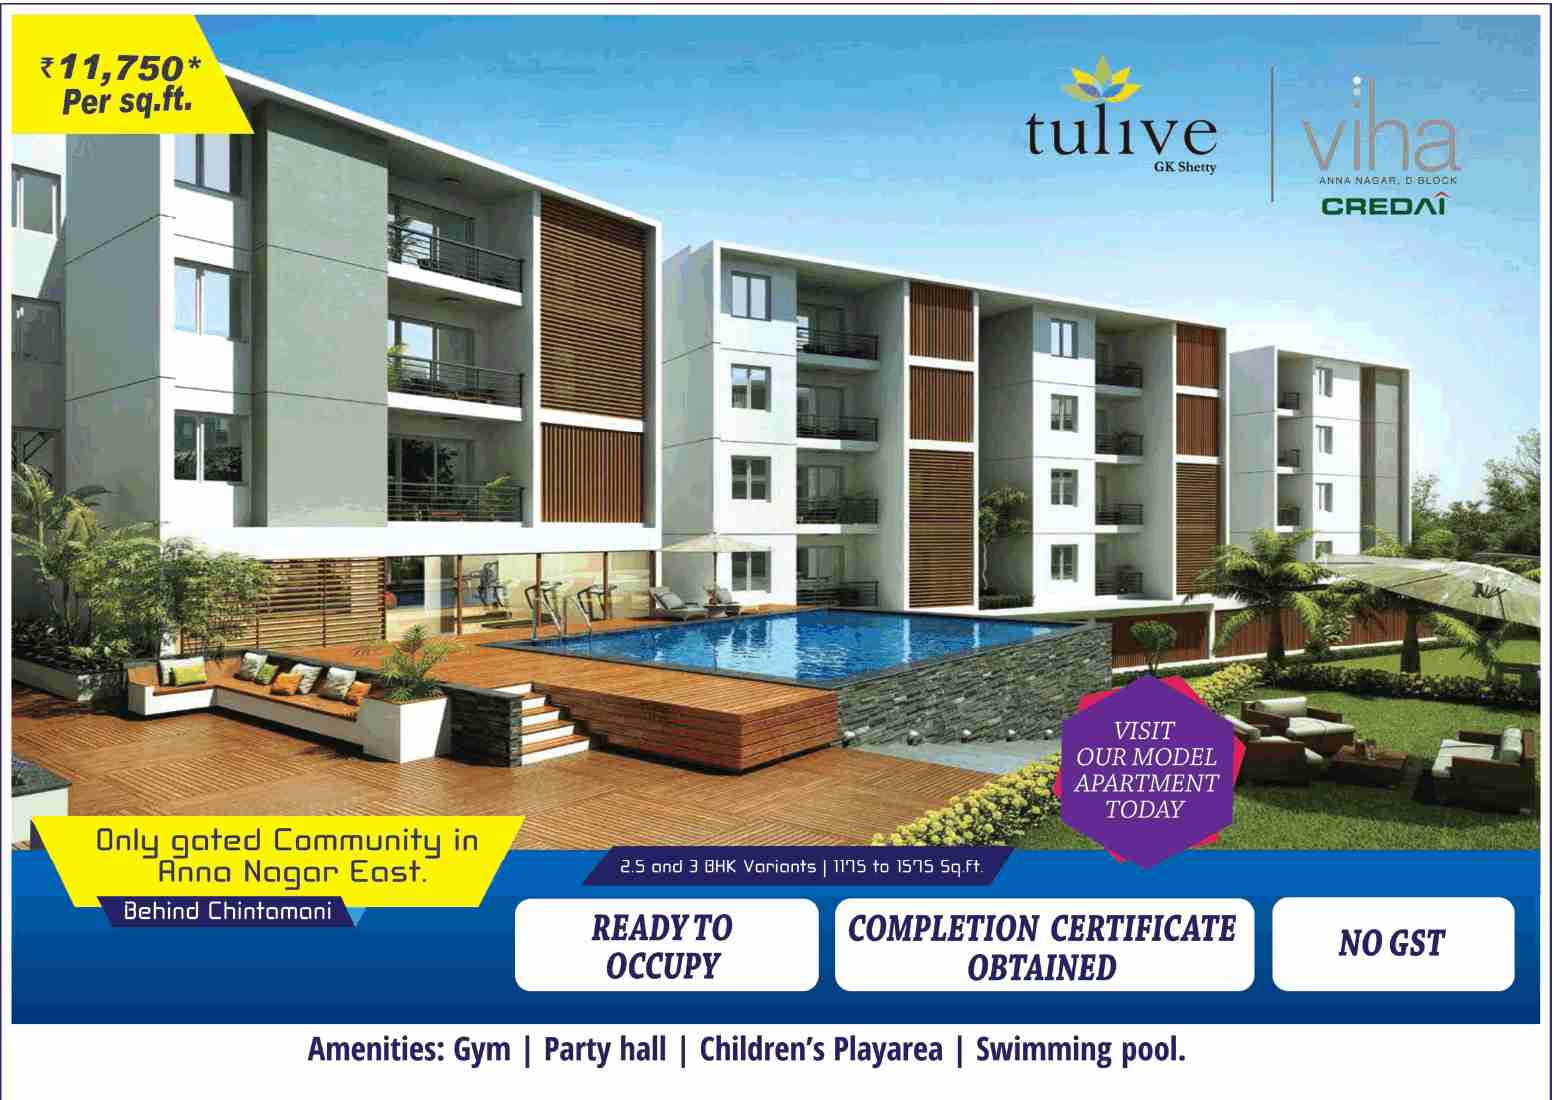 Reside at Tulive Viha the only gated community in Anna Nagar East, Chennai